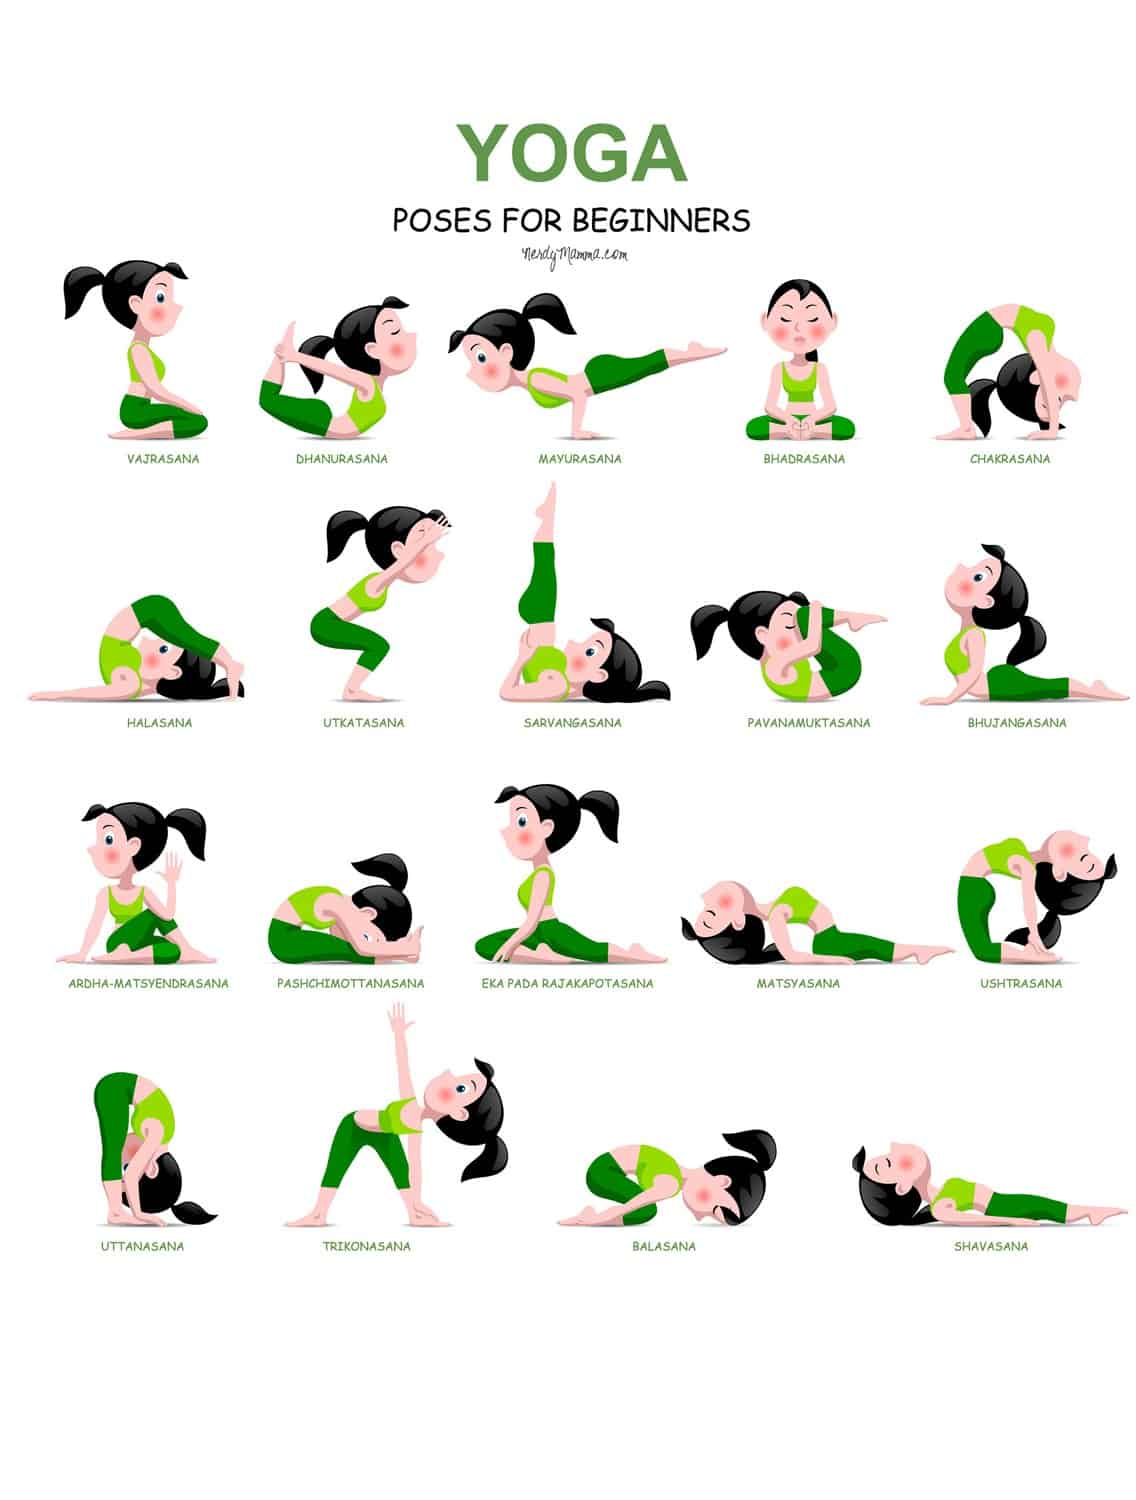 Beginners Yoga Series: 10 Most Important Yoga Poses for Beginners - YouTube-nttc.com.vn